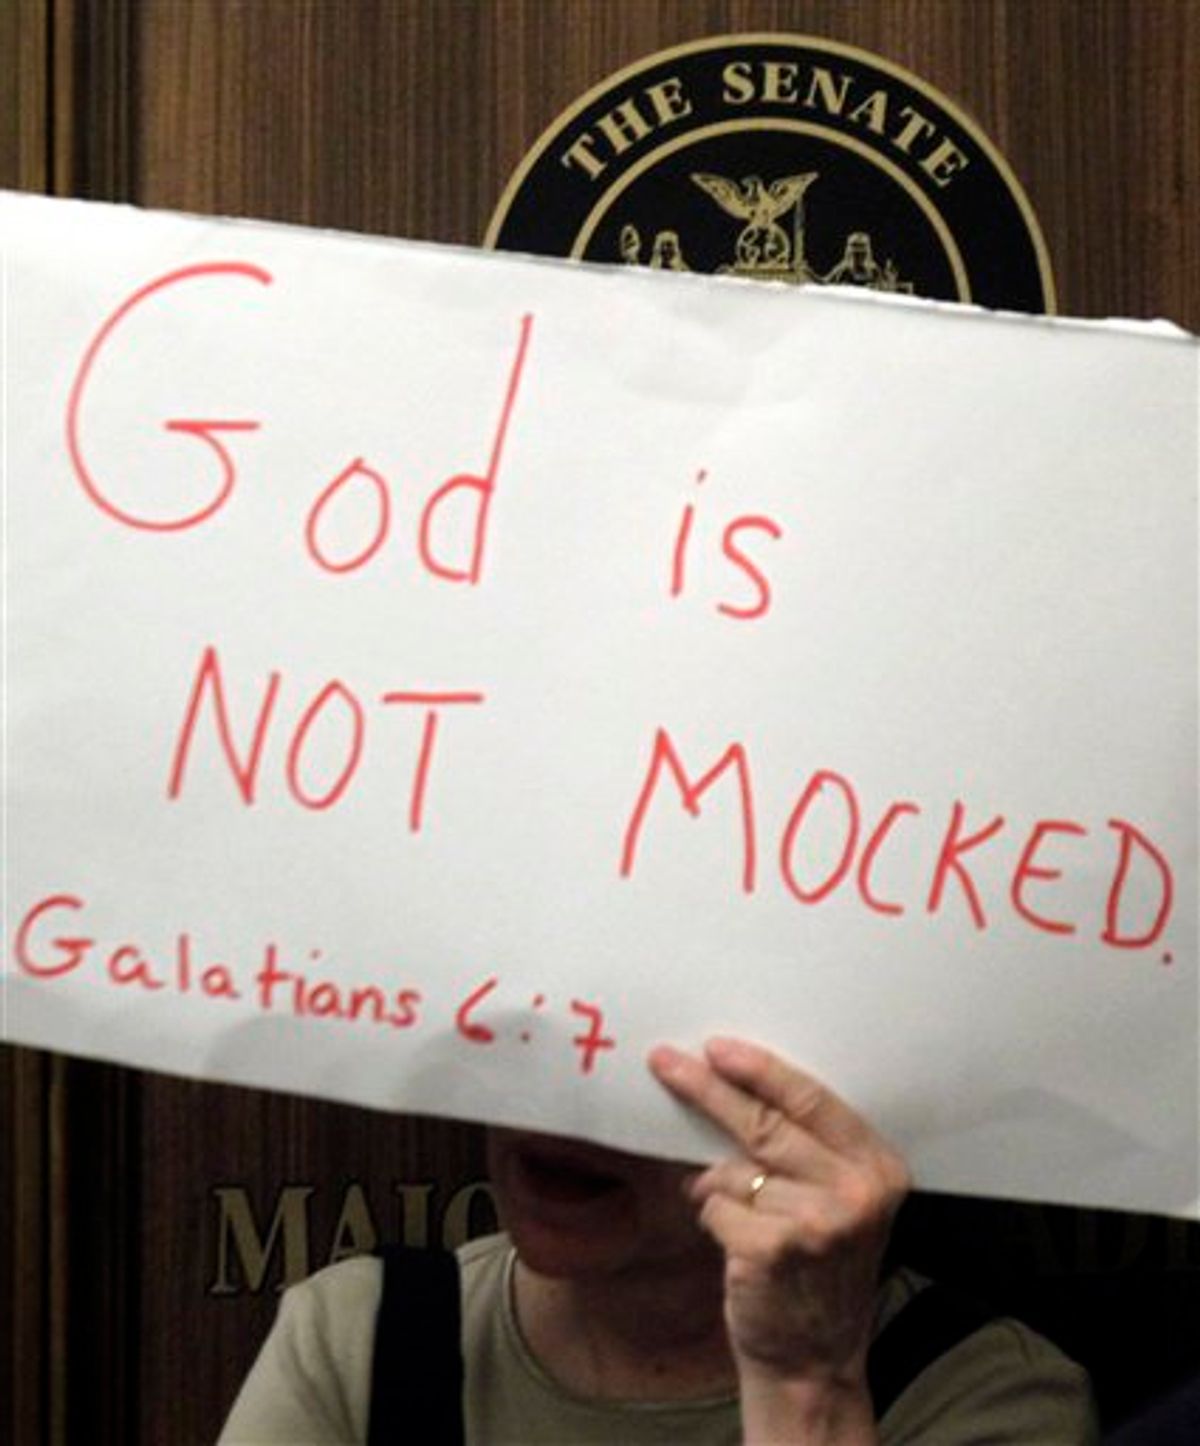 A woman holds a sign as supporters and opponents of gay marriage rallied in a hallway outside a Republican conference room at the Capitol in Albany, N.Y., on Wednesday, June 22, 2011.   Senate leader Dean Skelos and Assembly Speaker Sheldon Silver agree they are working through the proposed additional religious protections that could bring a gay marriage bill to the Senate floor.  No deal was struck. But both leaders say progress is being made and no major obstacles to agreement on the provisions is in sight.  (AP Photo/Mike Groll)  (AP)